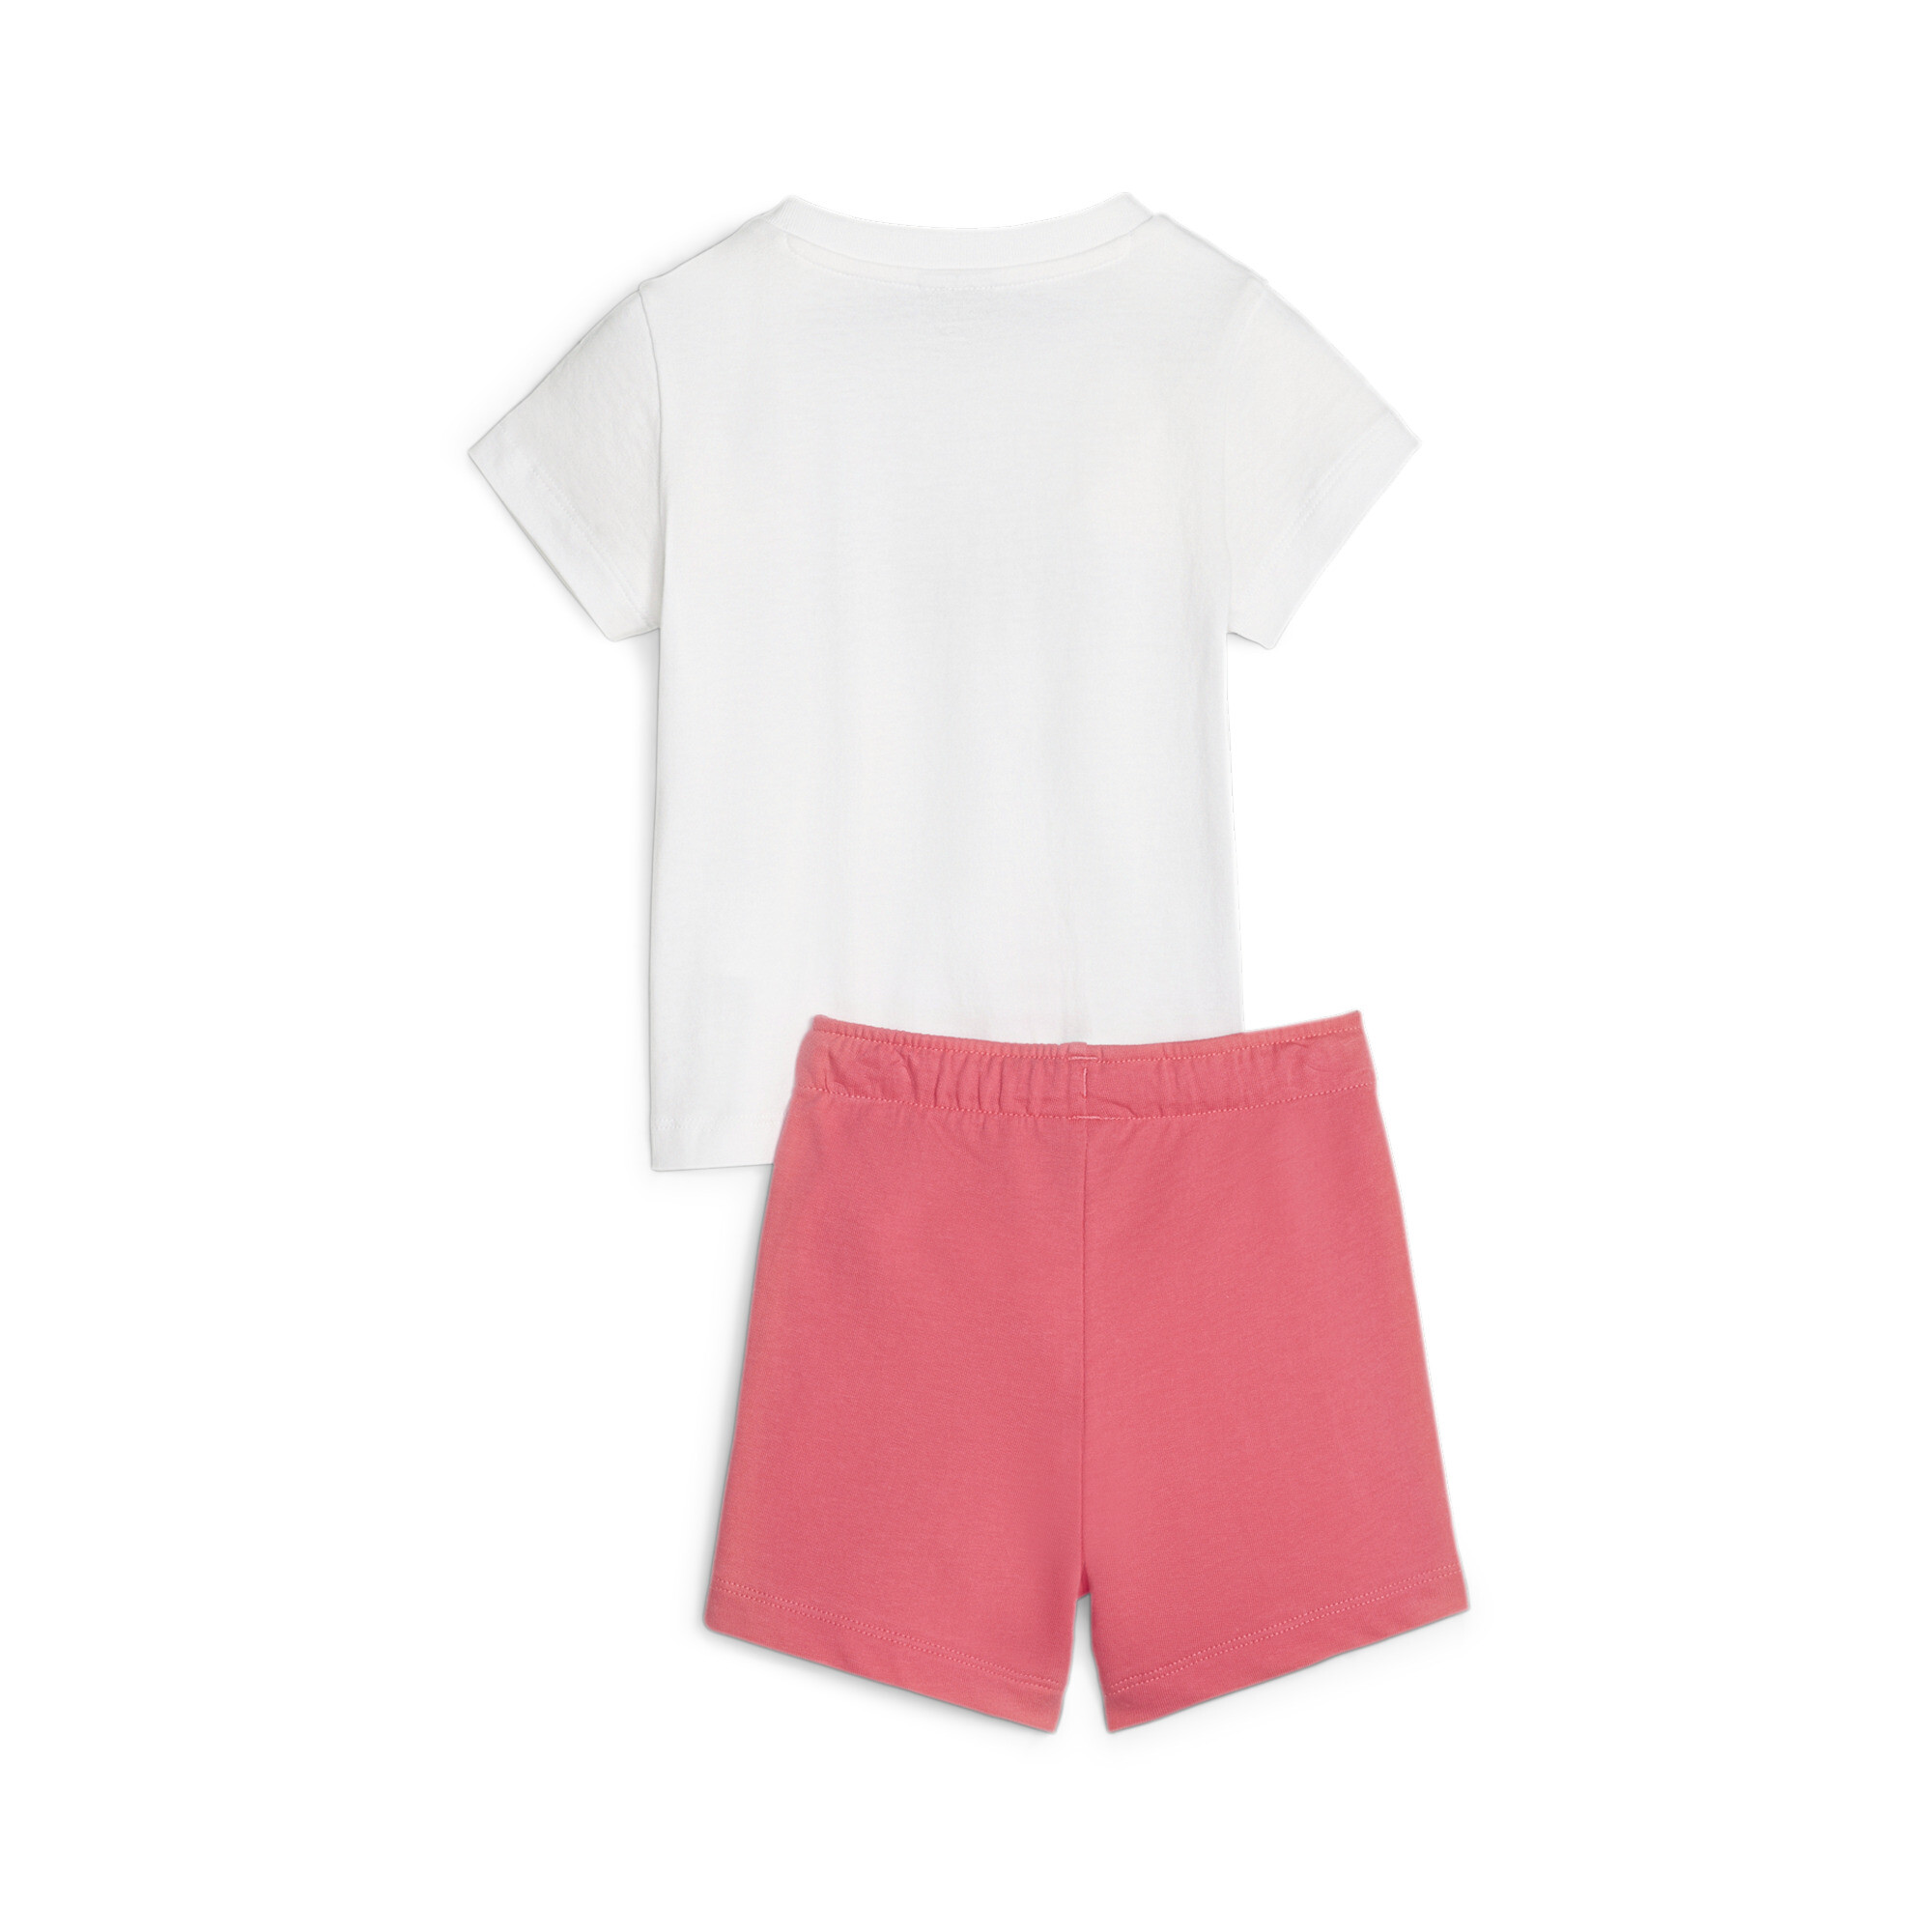 PUMA Minicats T-Shirt And Shorts Babies' Set In Pink, Size 1-2 Youth